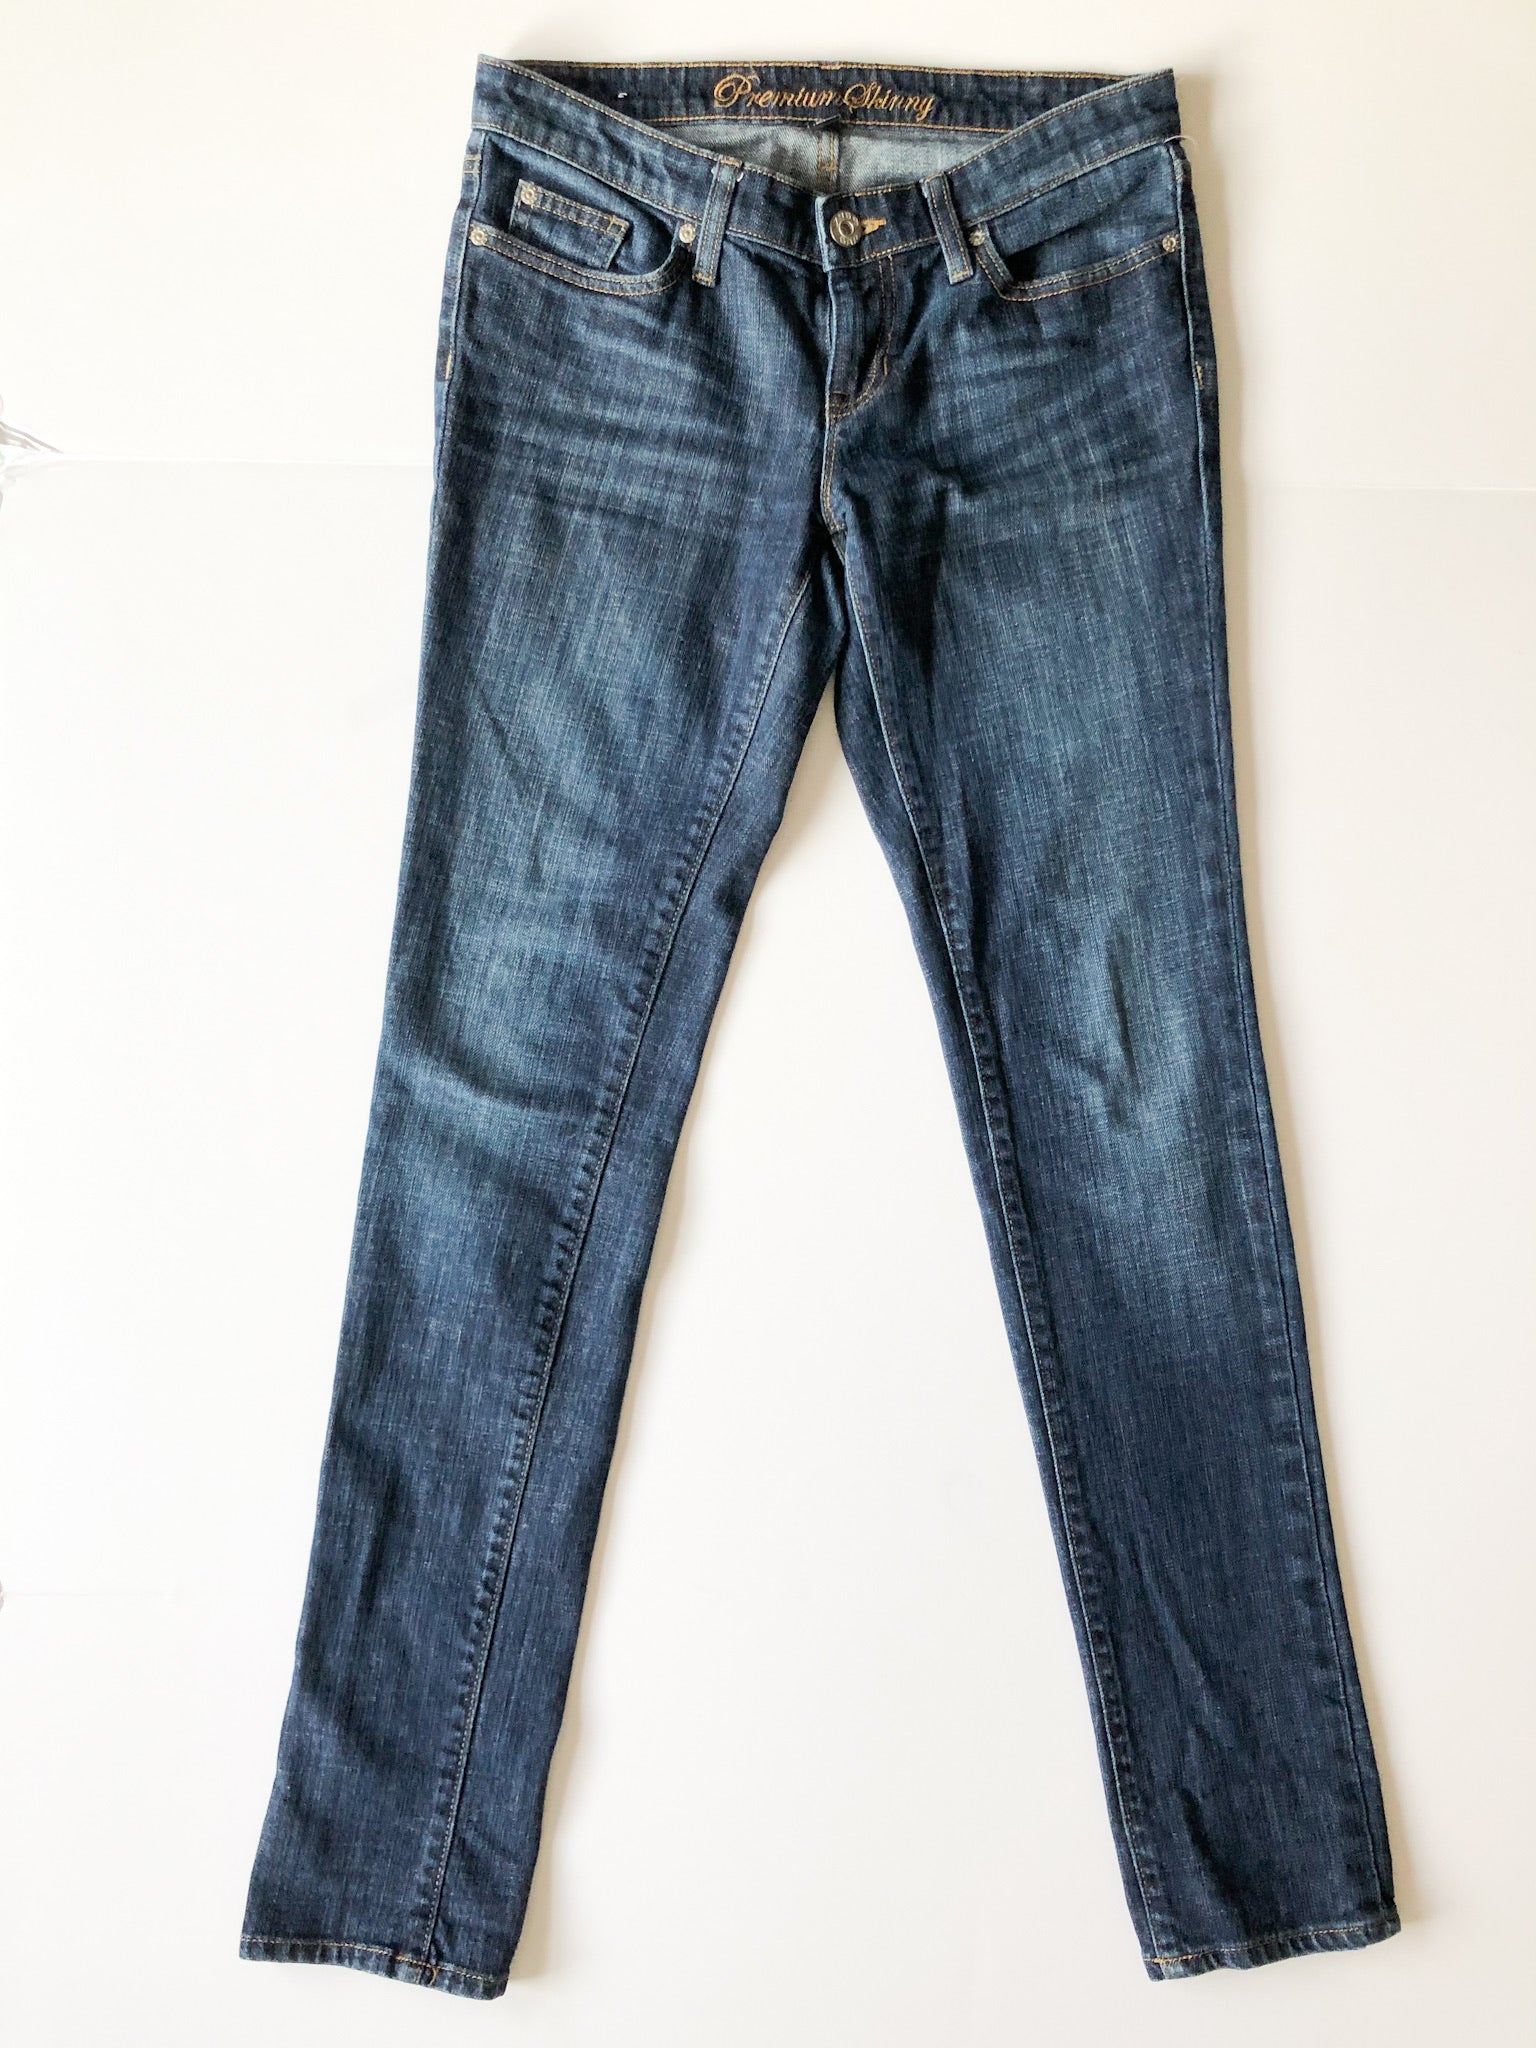 CITIZENS OF HUMANITY SKINNY MATERNITY JEANS (USED CONDITION